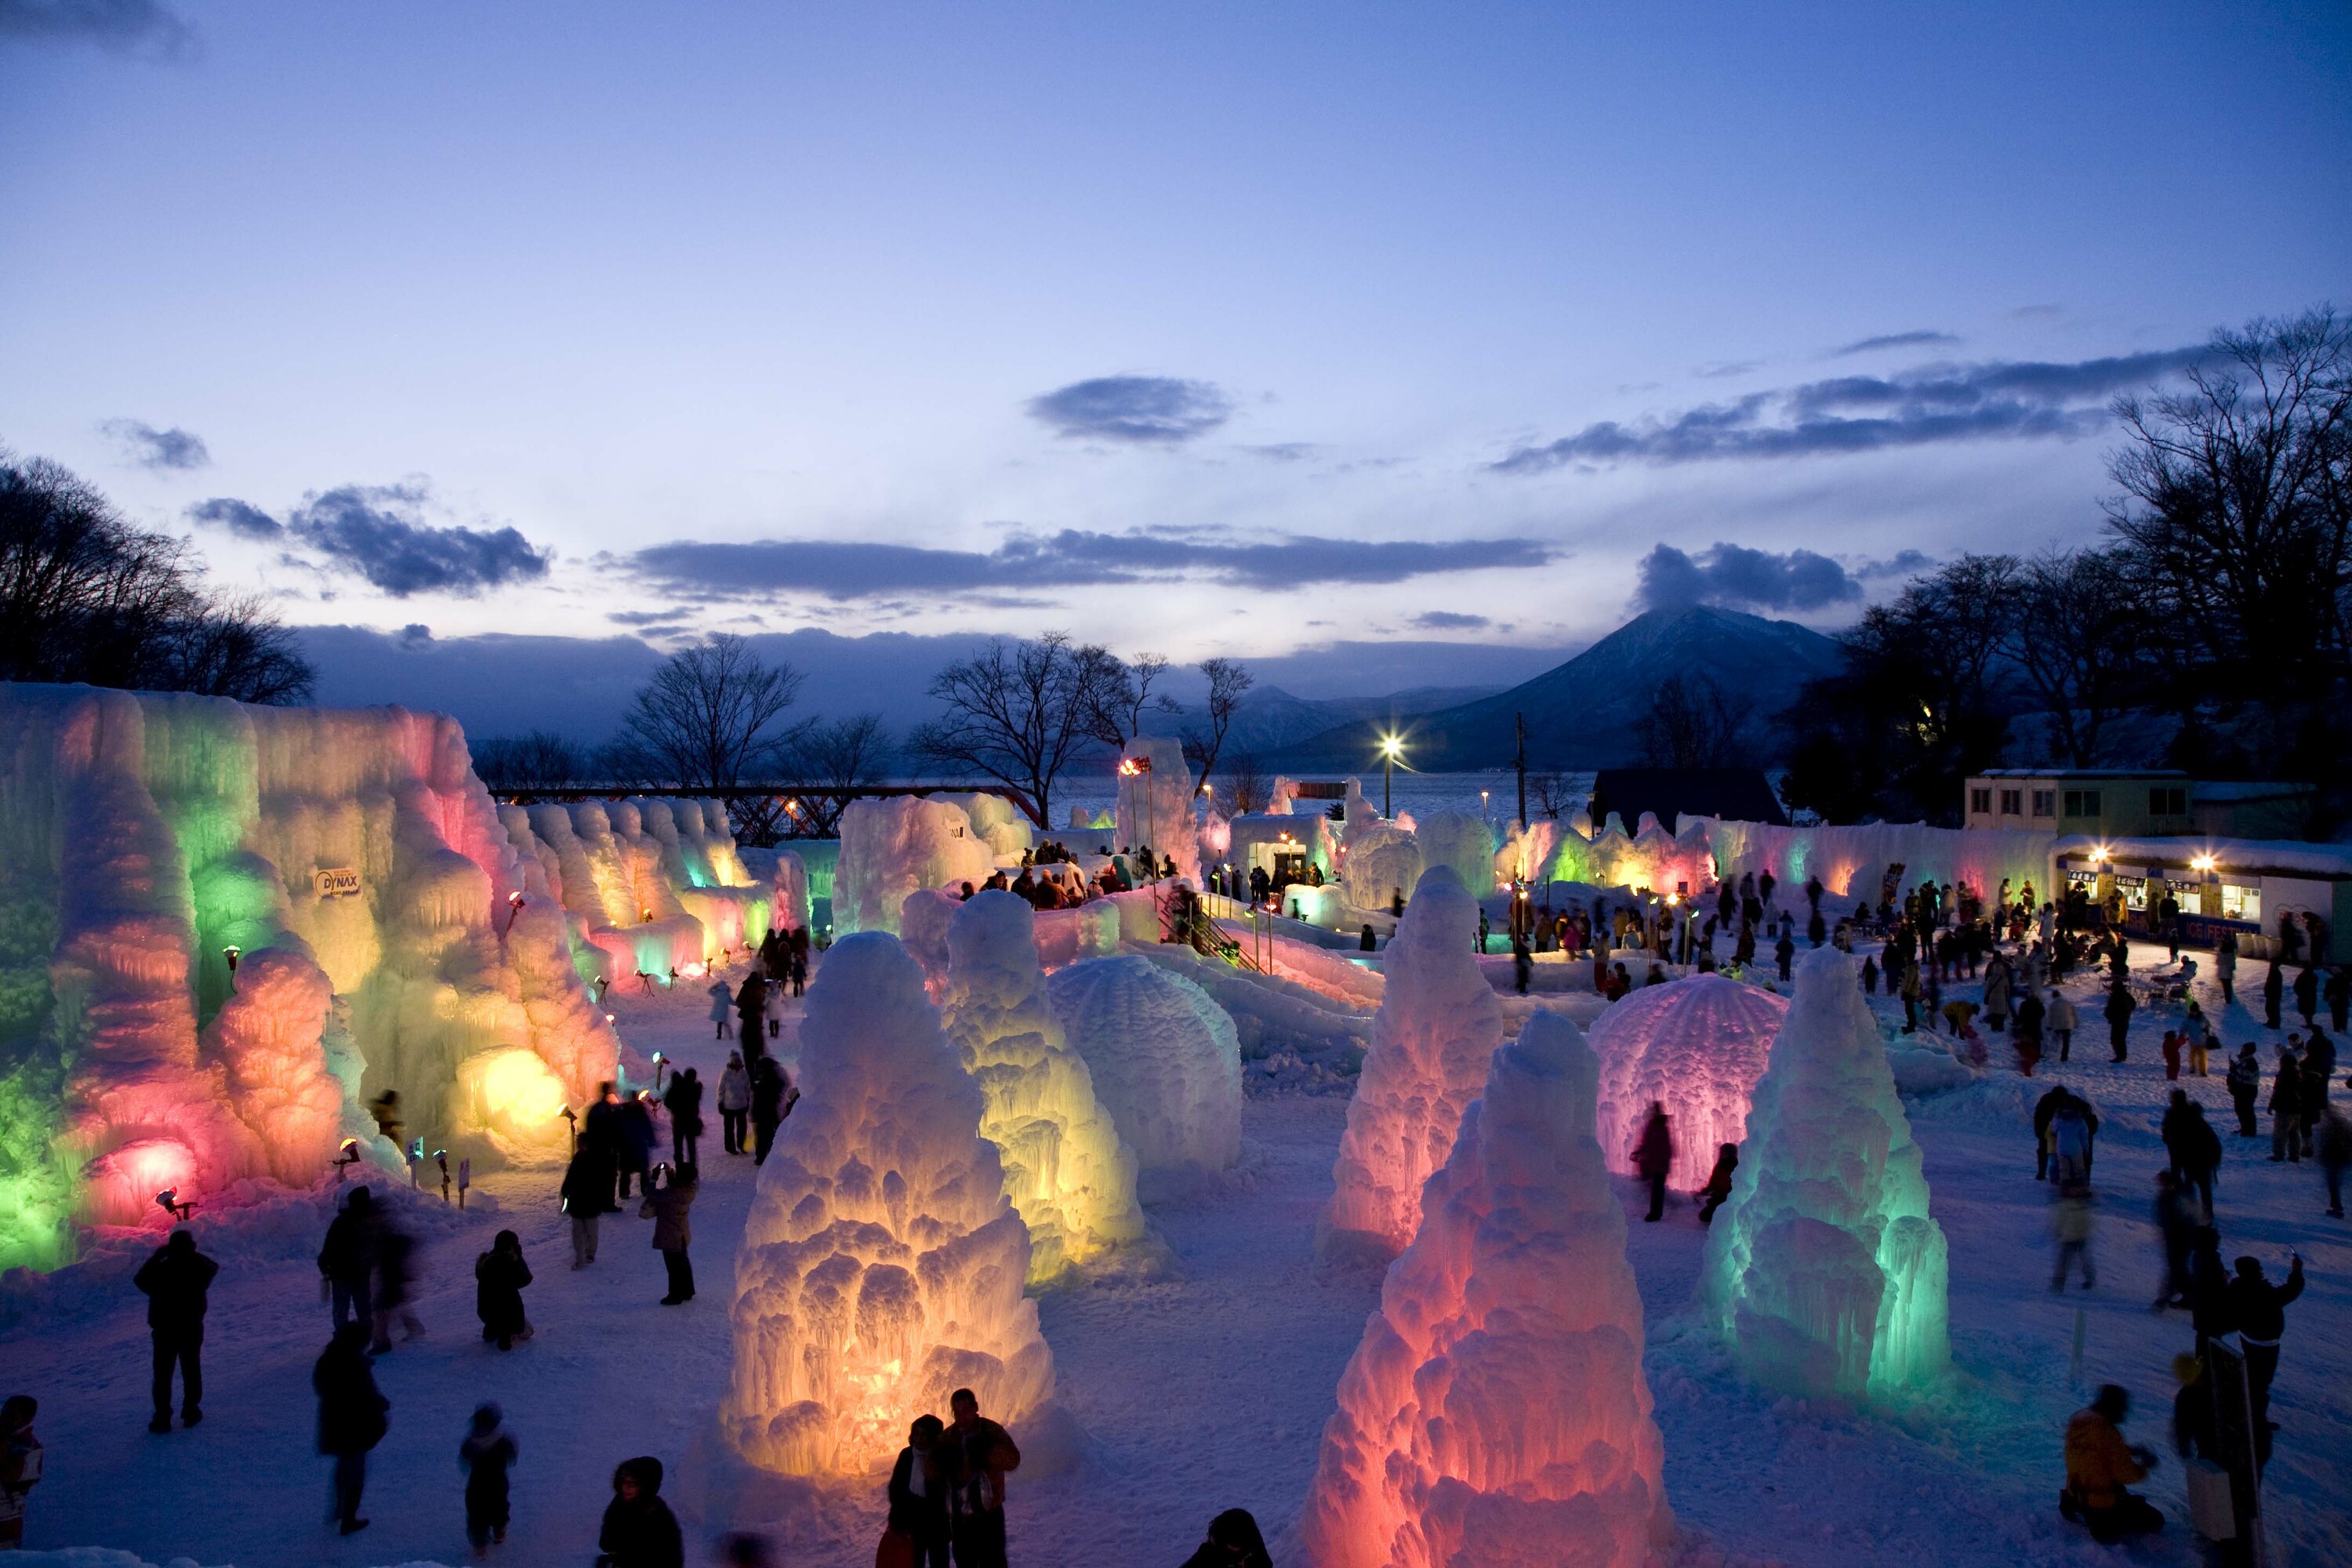 See stunning ice sculptures at this annual ice festival in Hokkaido